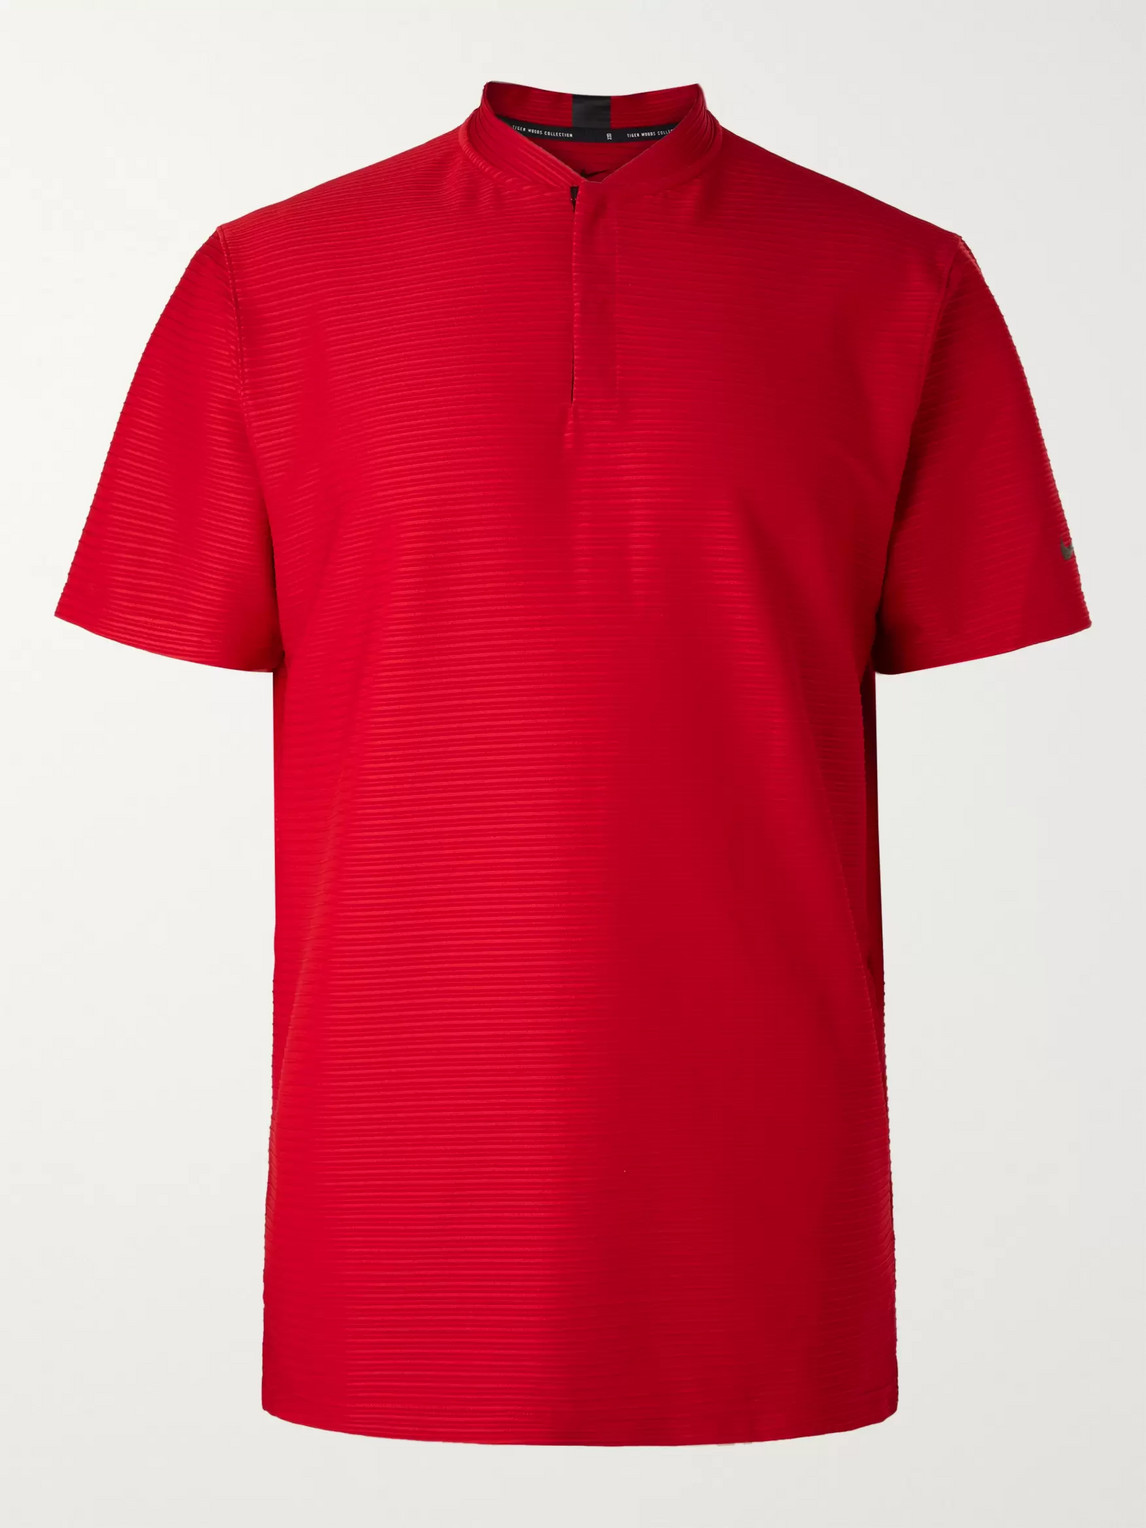 NIKE TIGER WOODS RIBBED DRI-FIT STRETCH-JERSEY GOLF POLO SHIRT